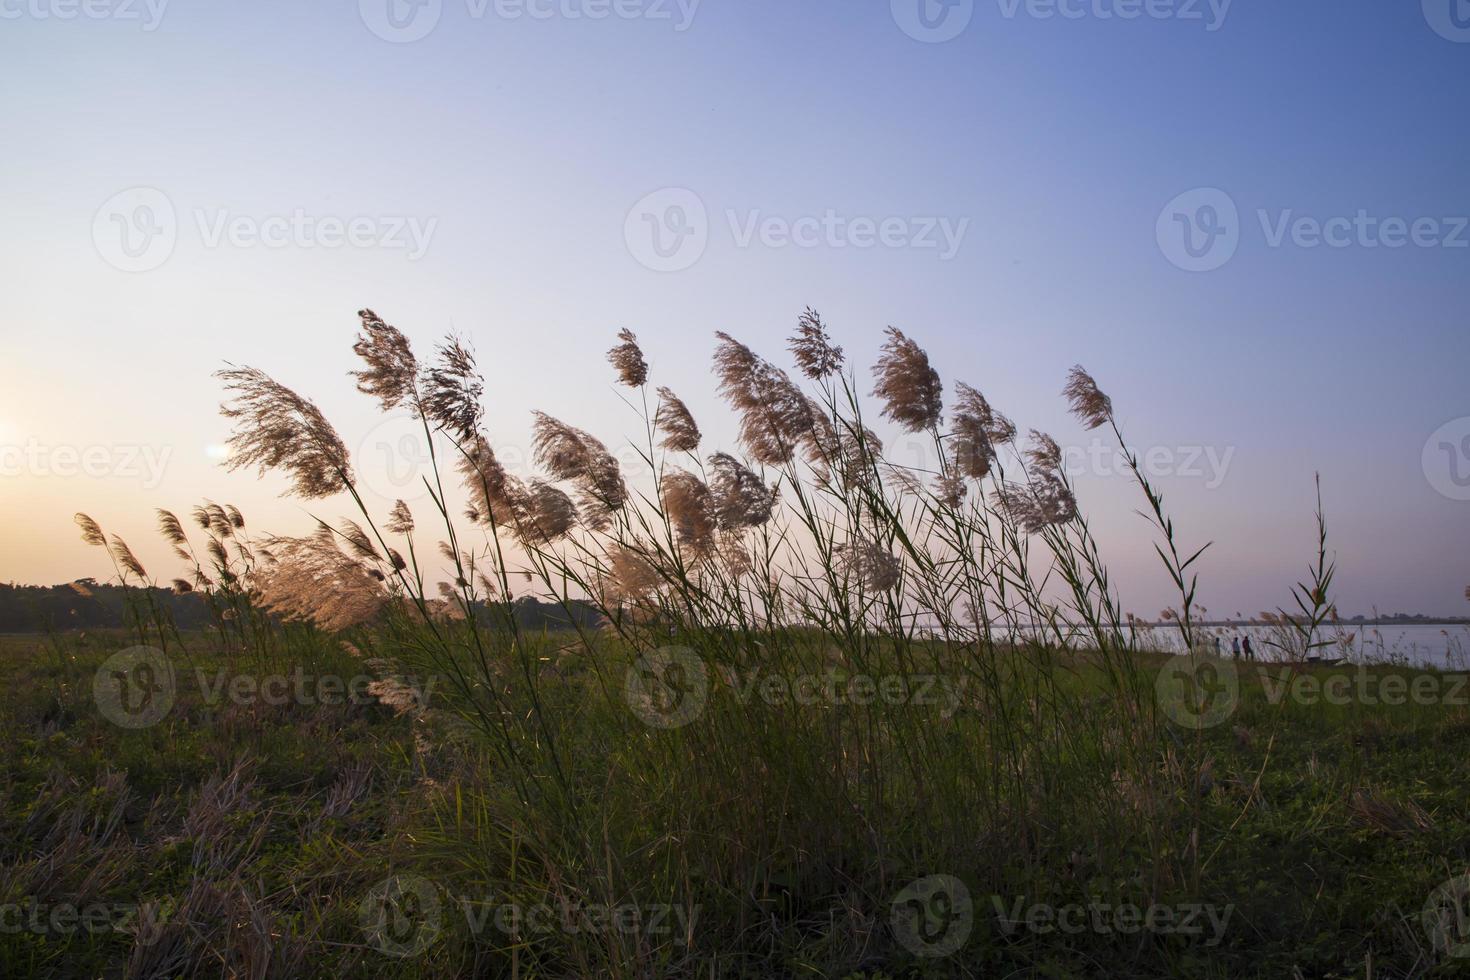 Kans grass or saccharum spontaneum flowers field against the evening colorful blue sky photo